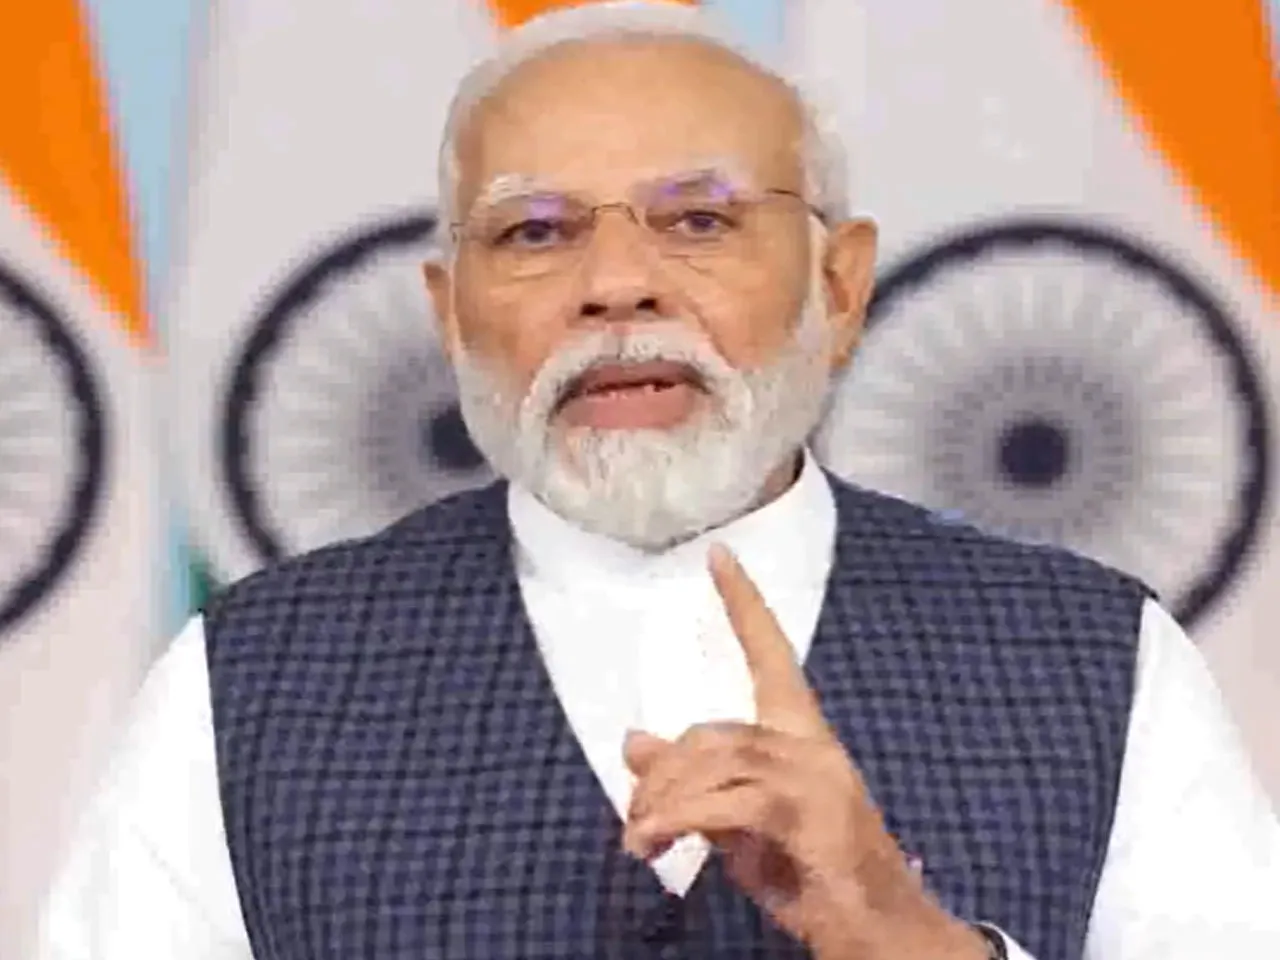 PM Modi’s strong message on Corruption